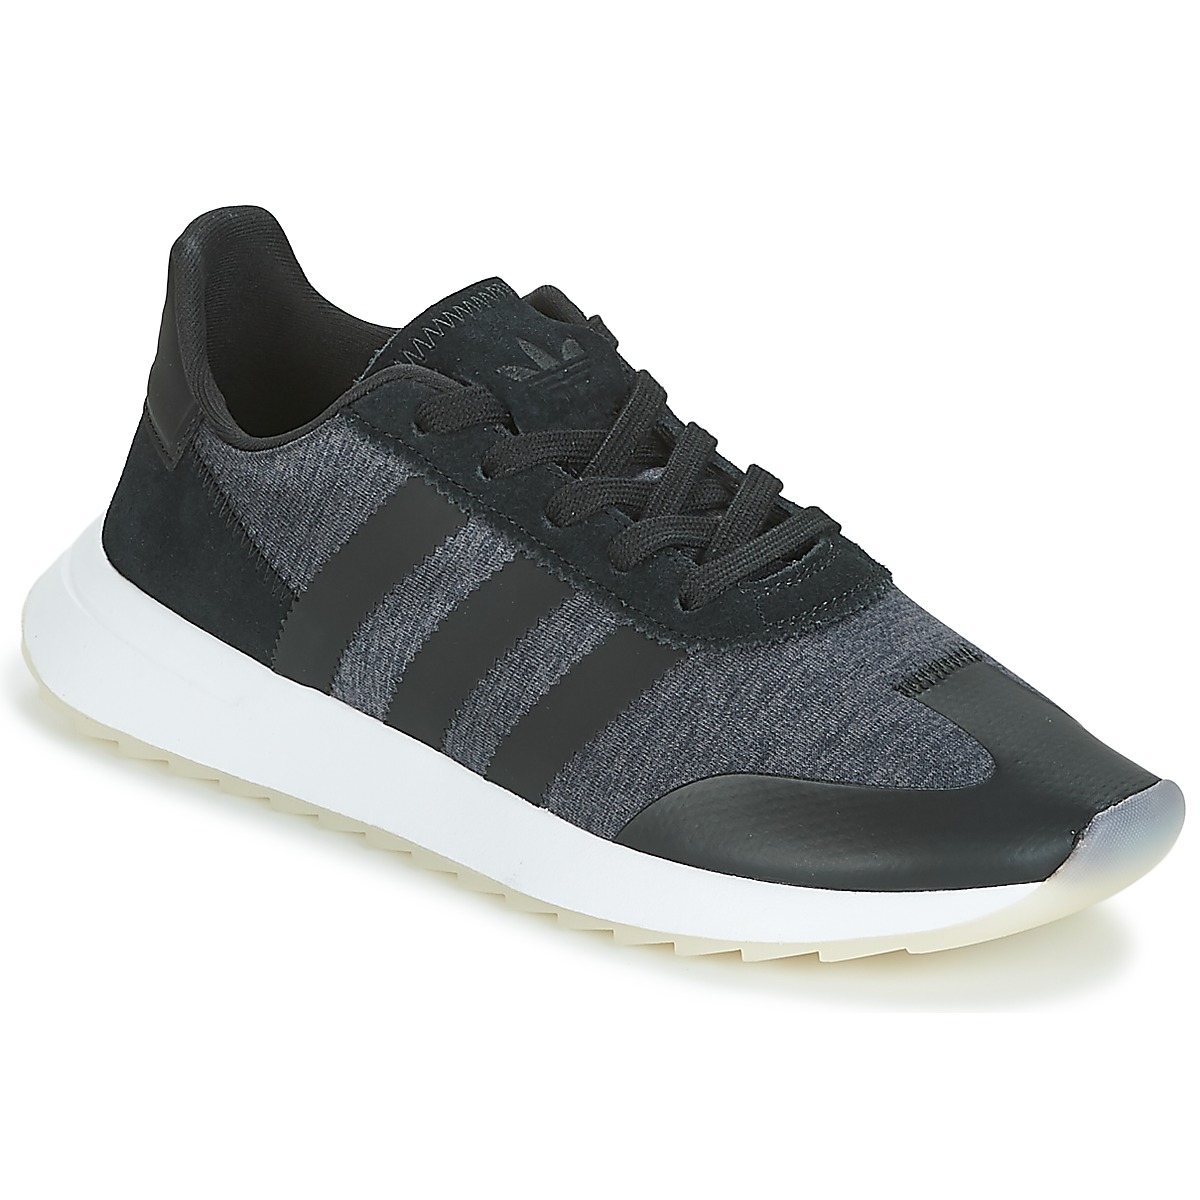 Delincuente Molesto déficit adidas Originals FLB RUNNER W Black - Fast delivery | Spartoo Europe ! -  Shoes Low top trainers Women 79,20 €